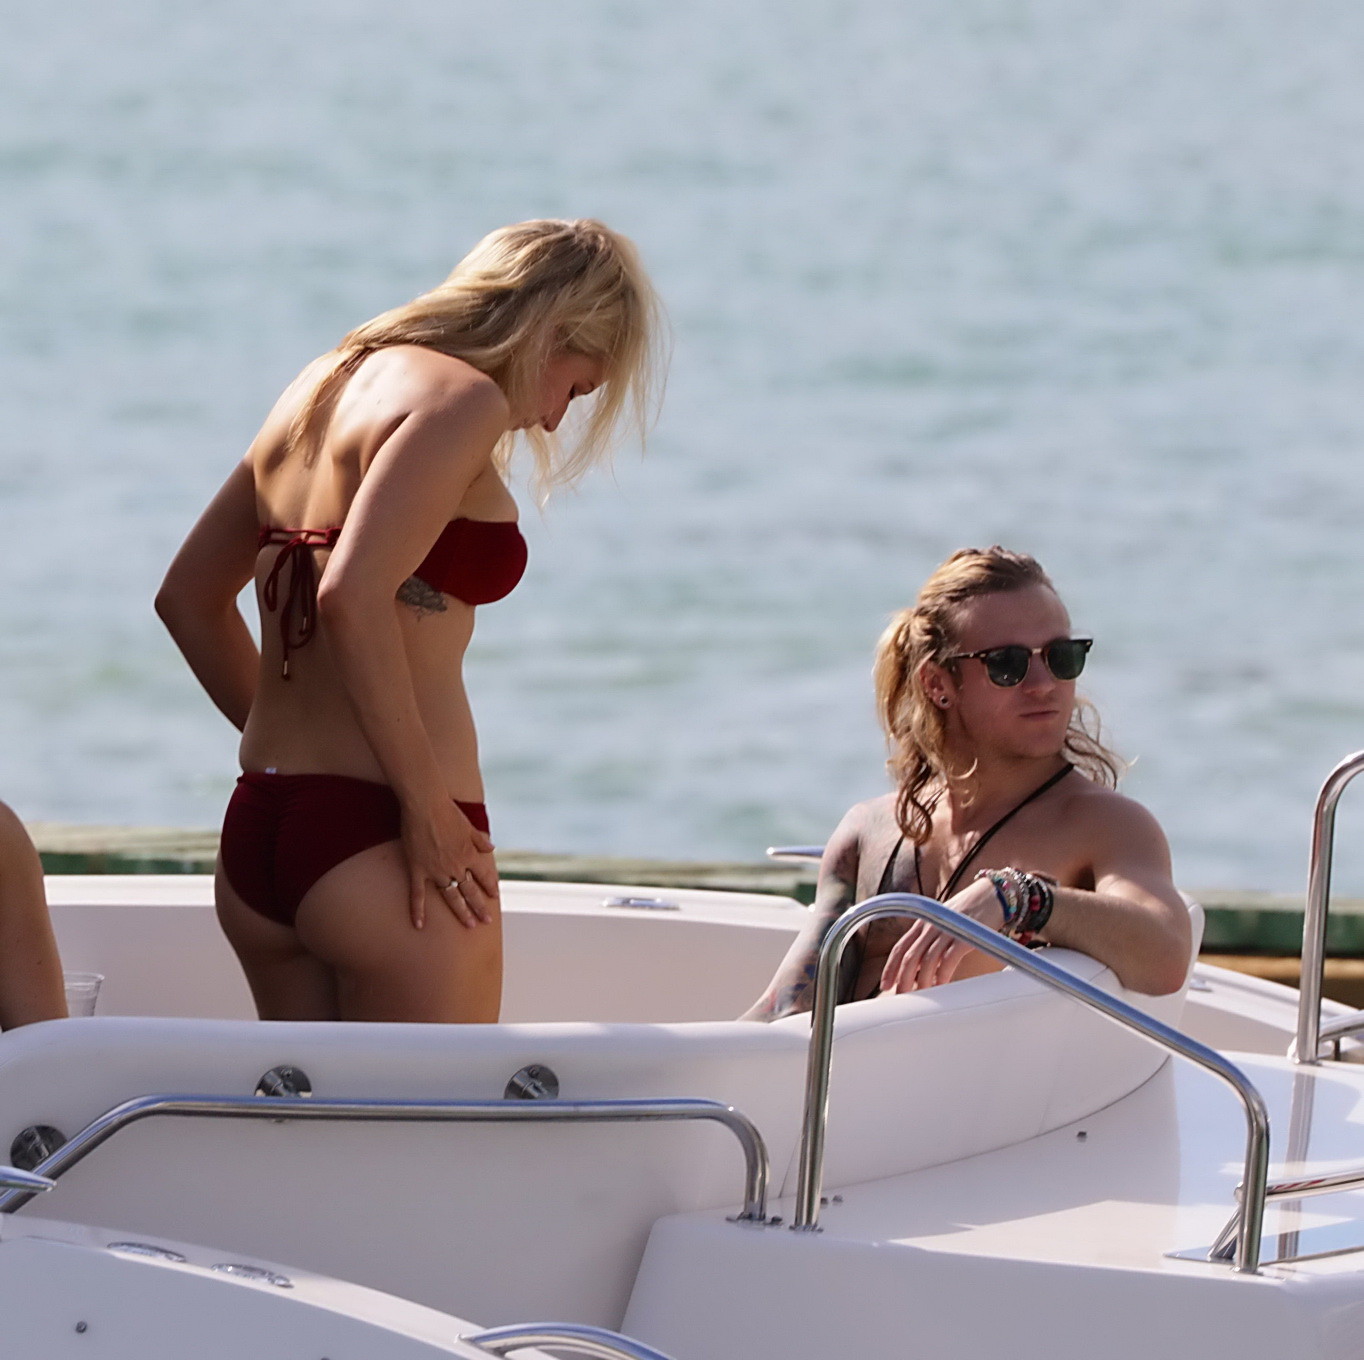 Ellie Goulding showing her ass in skimpy cherry colored bikini at the boat in Mi #75177093